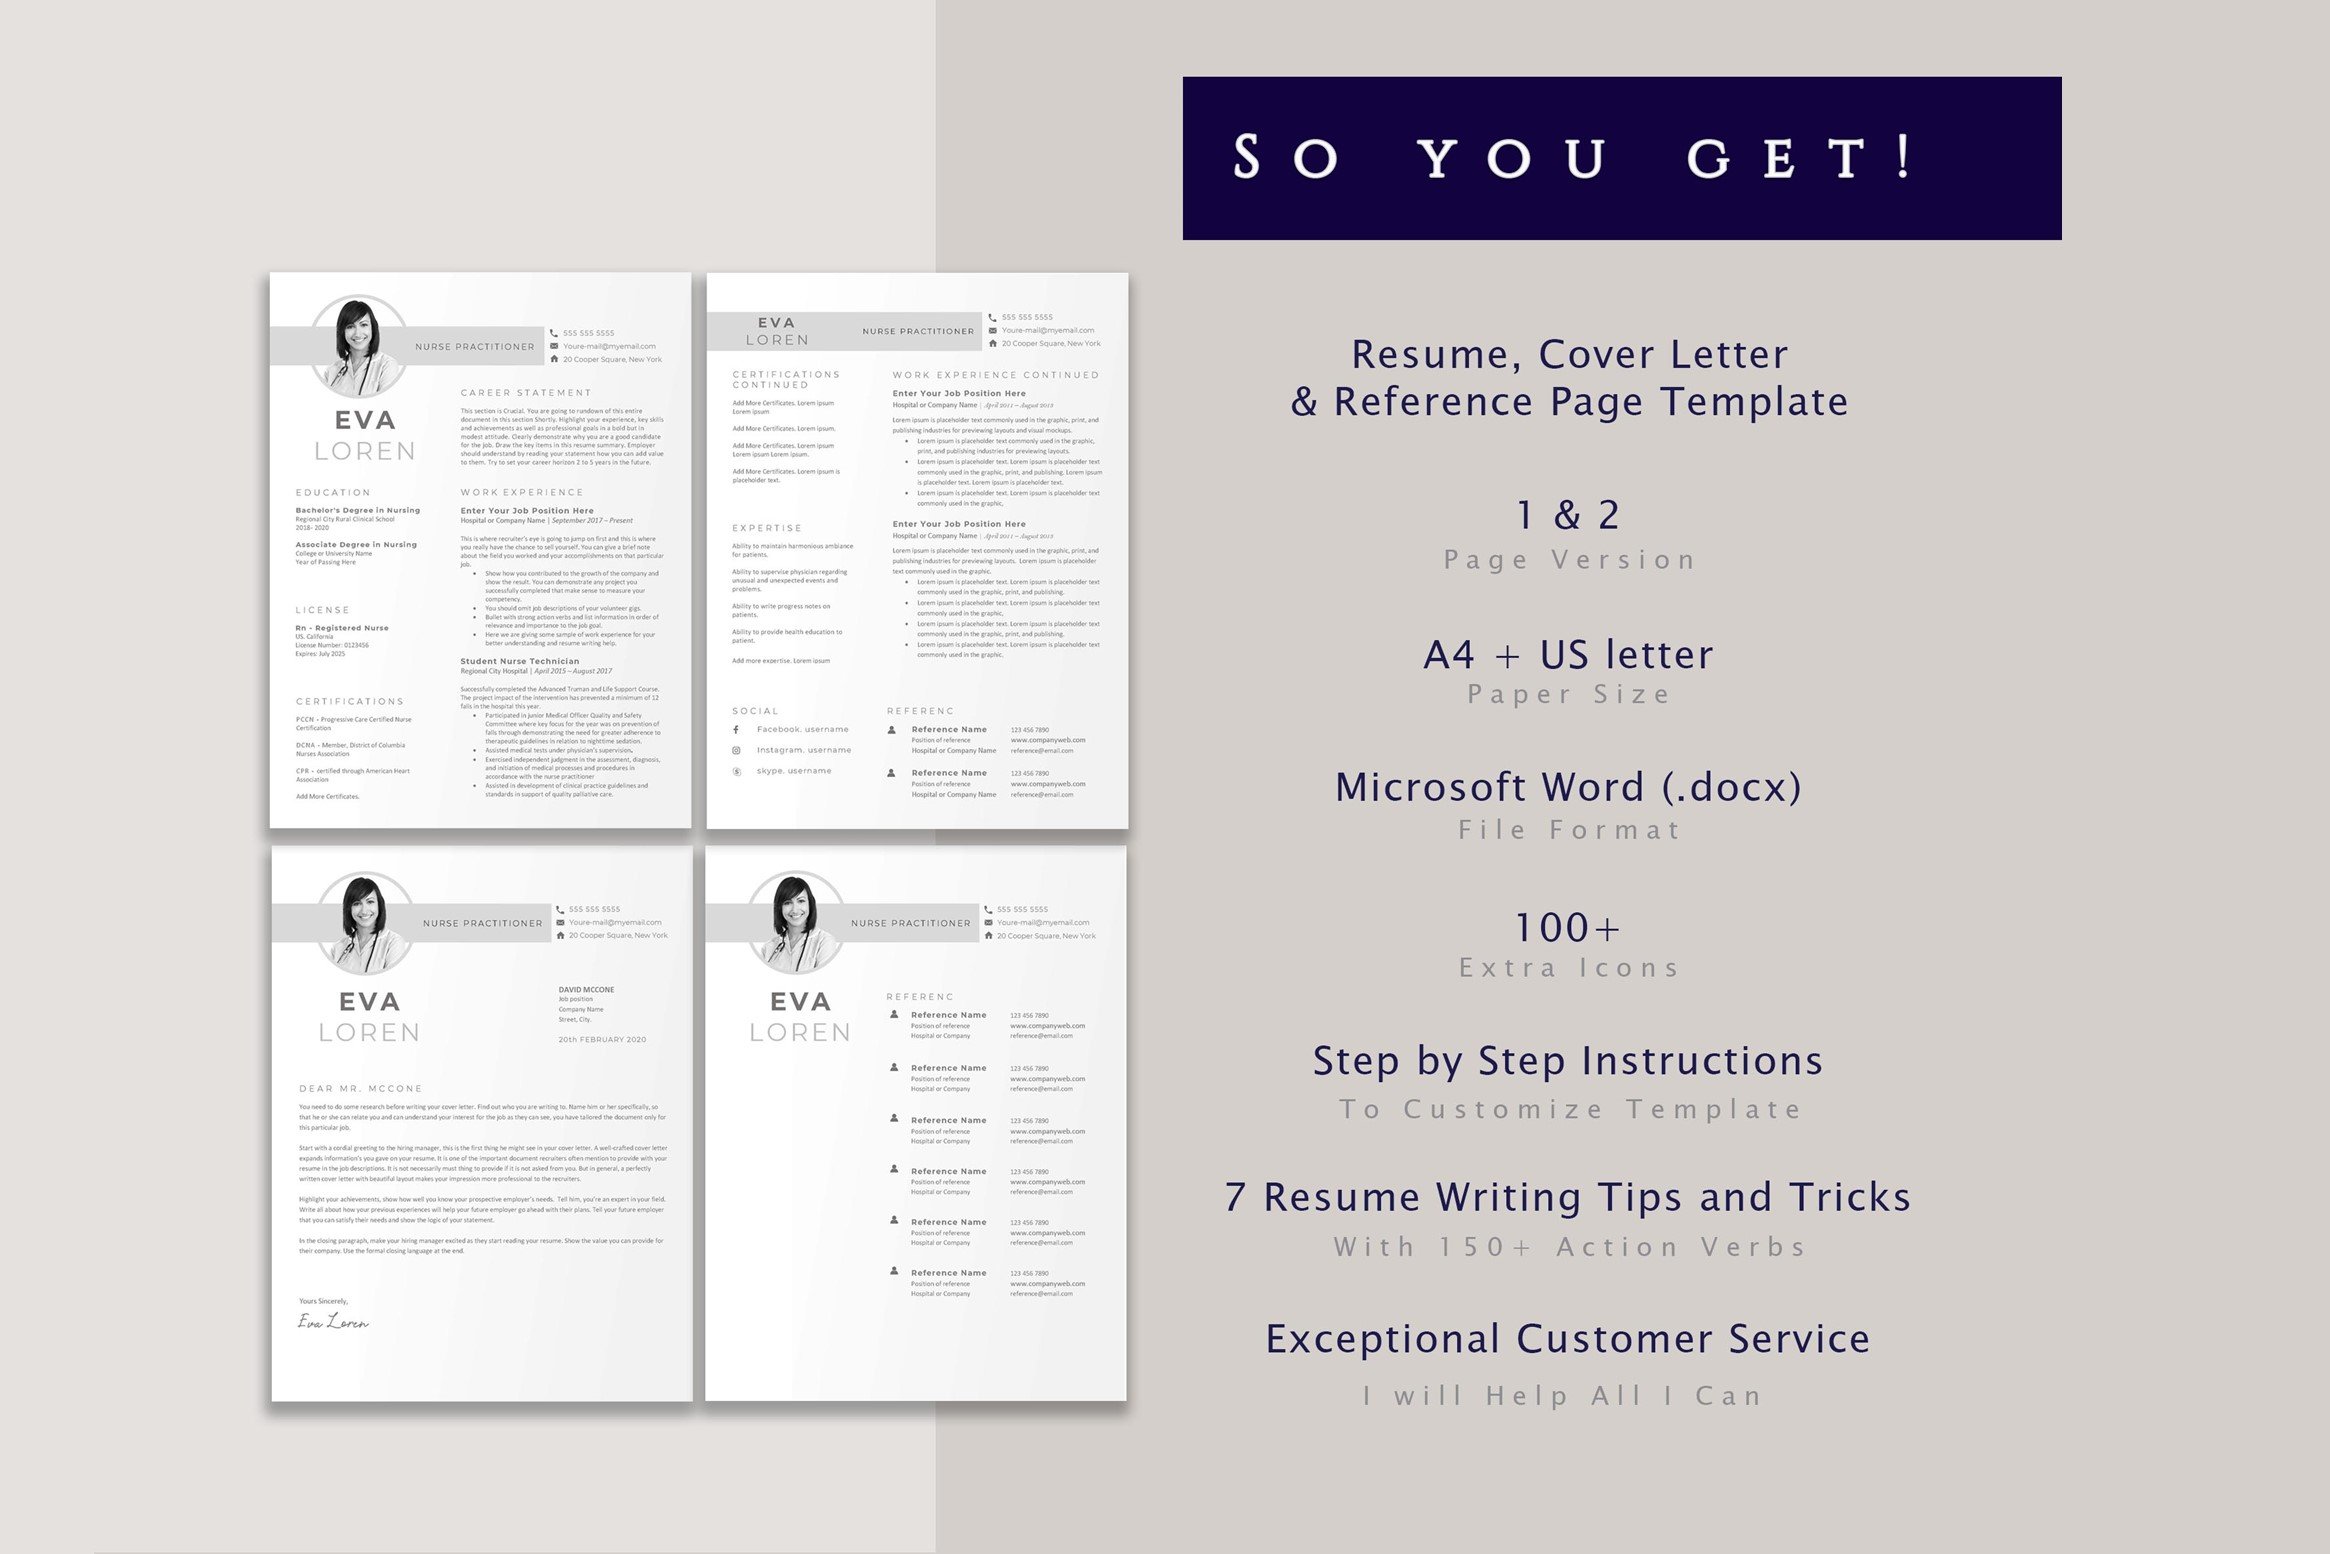 Set of three resumes with a cover letter and reference page.